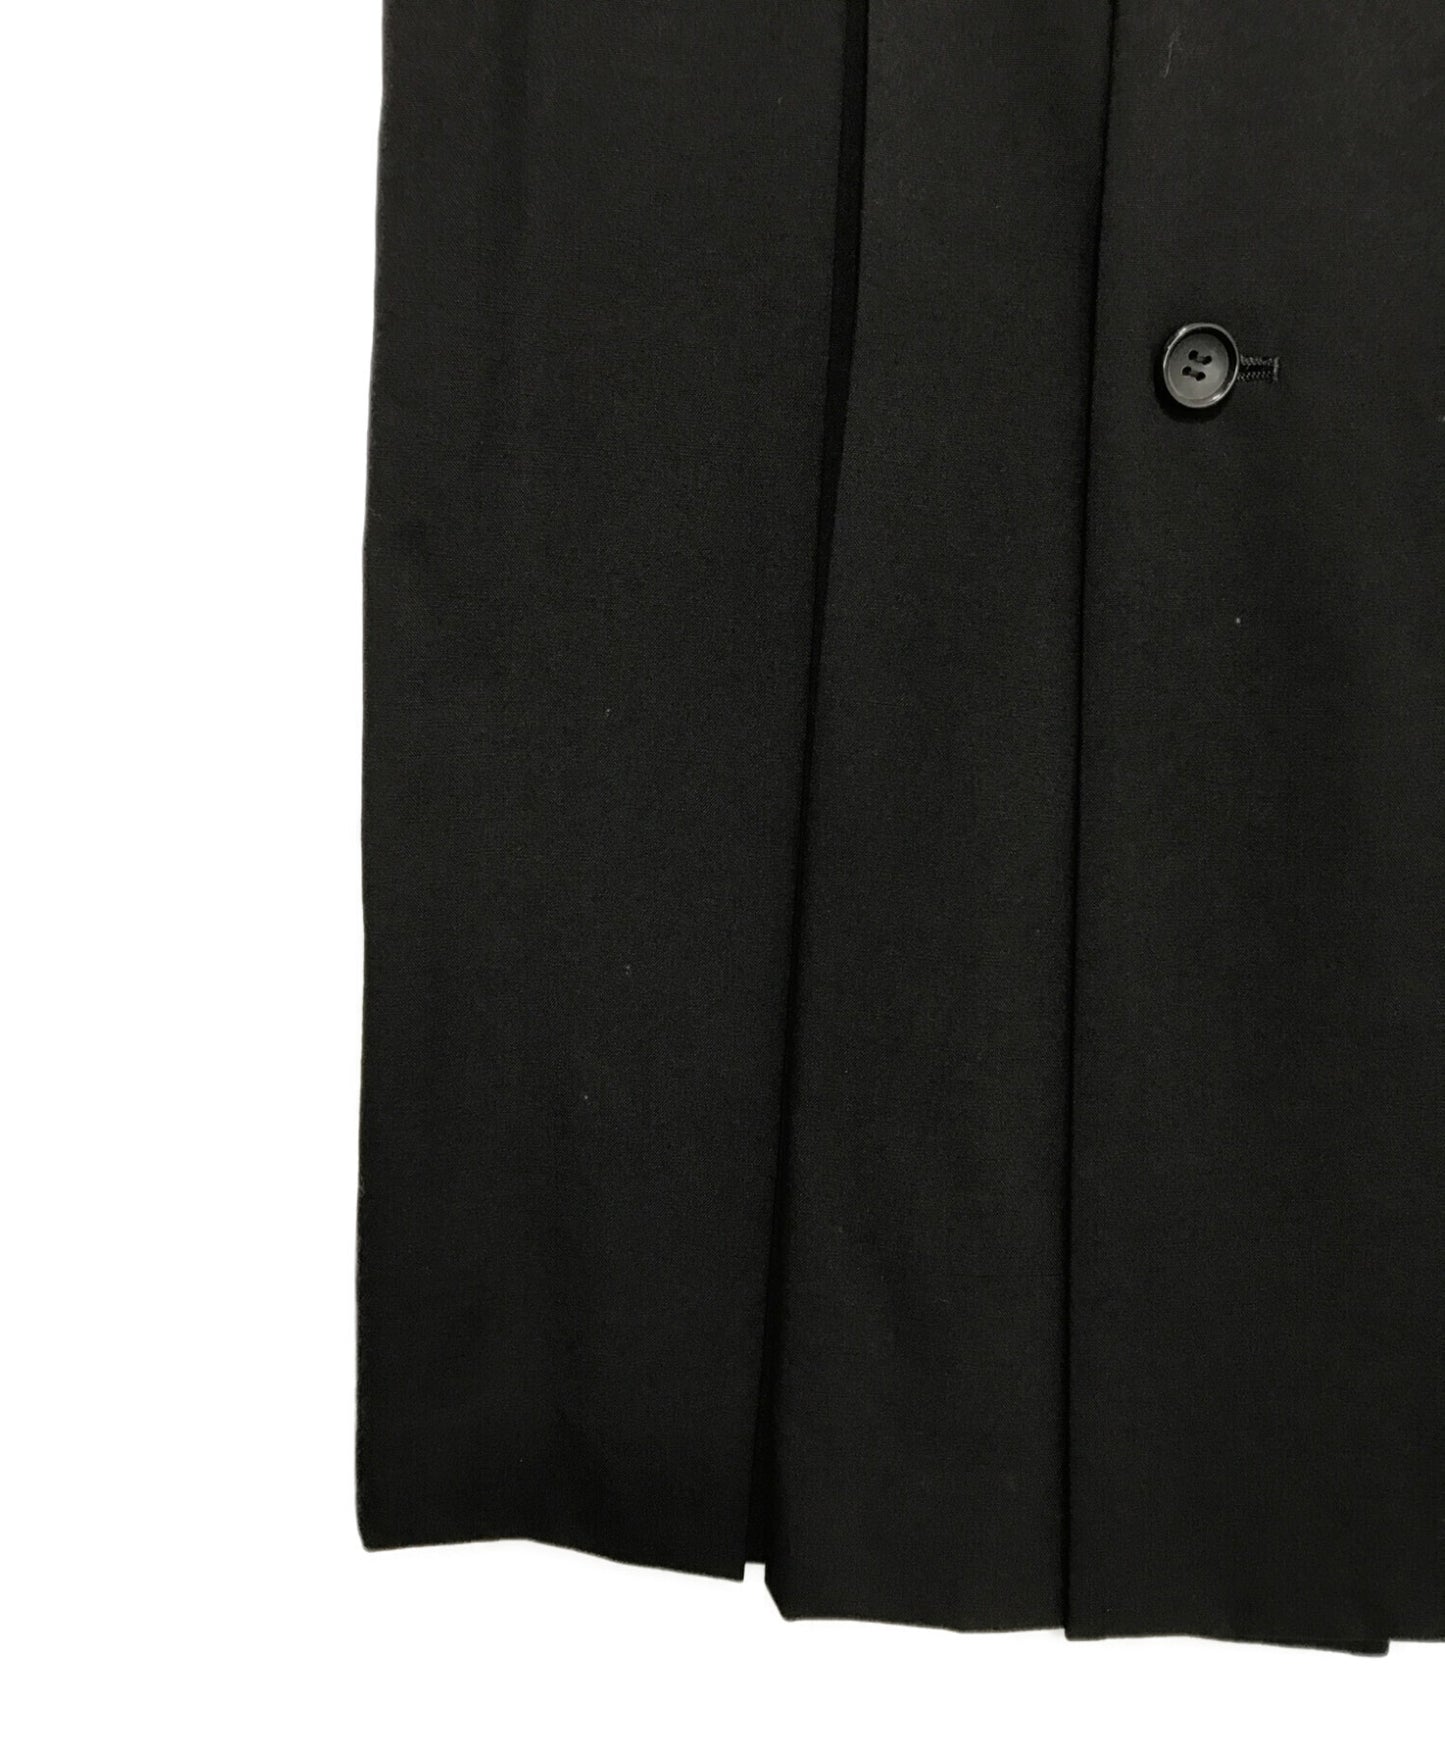 [Pre-owned] COMME des GARCONS HOMME PLUS tailored skirt PG-A003